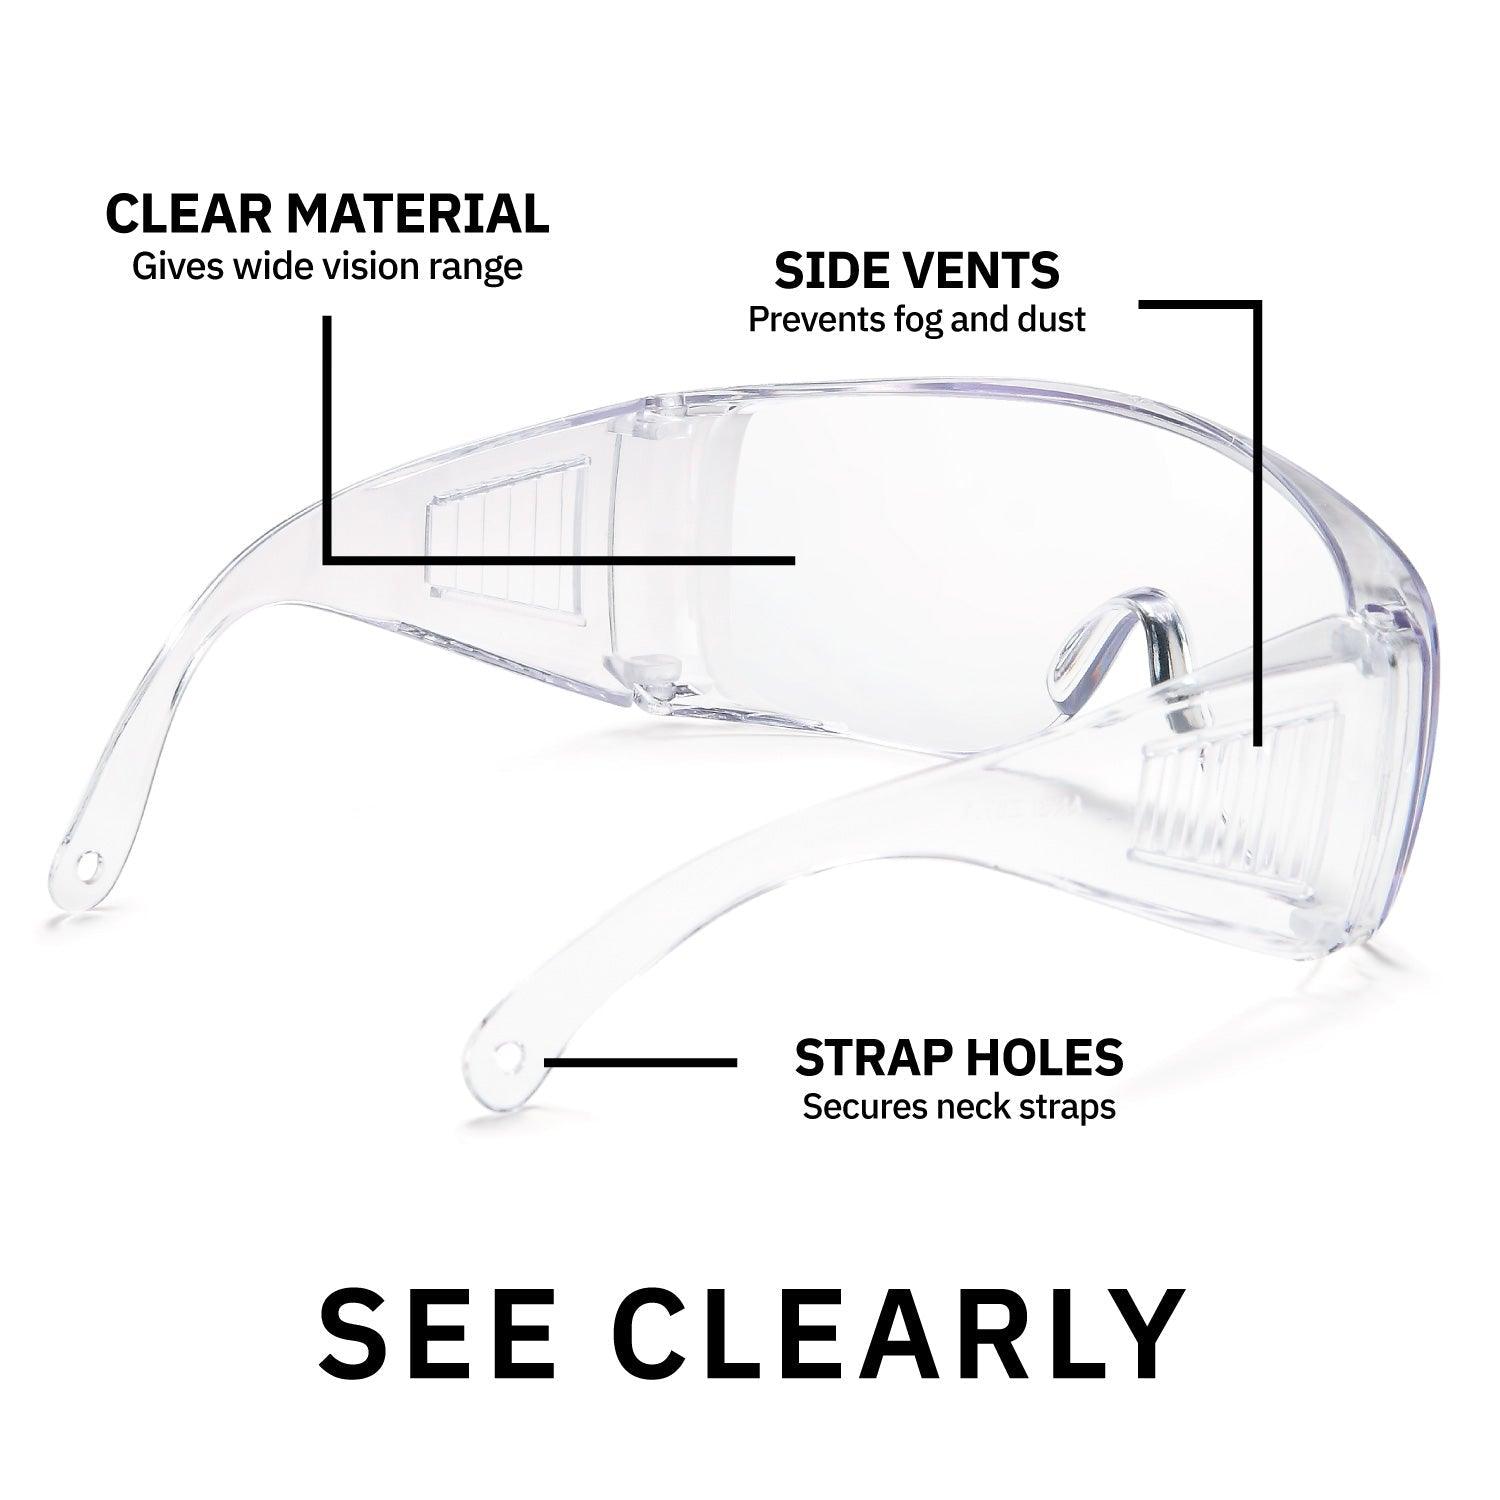 Protective Glasses - Pack of 12 (PG-4A) - Cetrix Technologies LLC